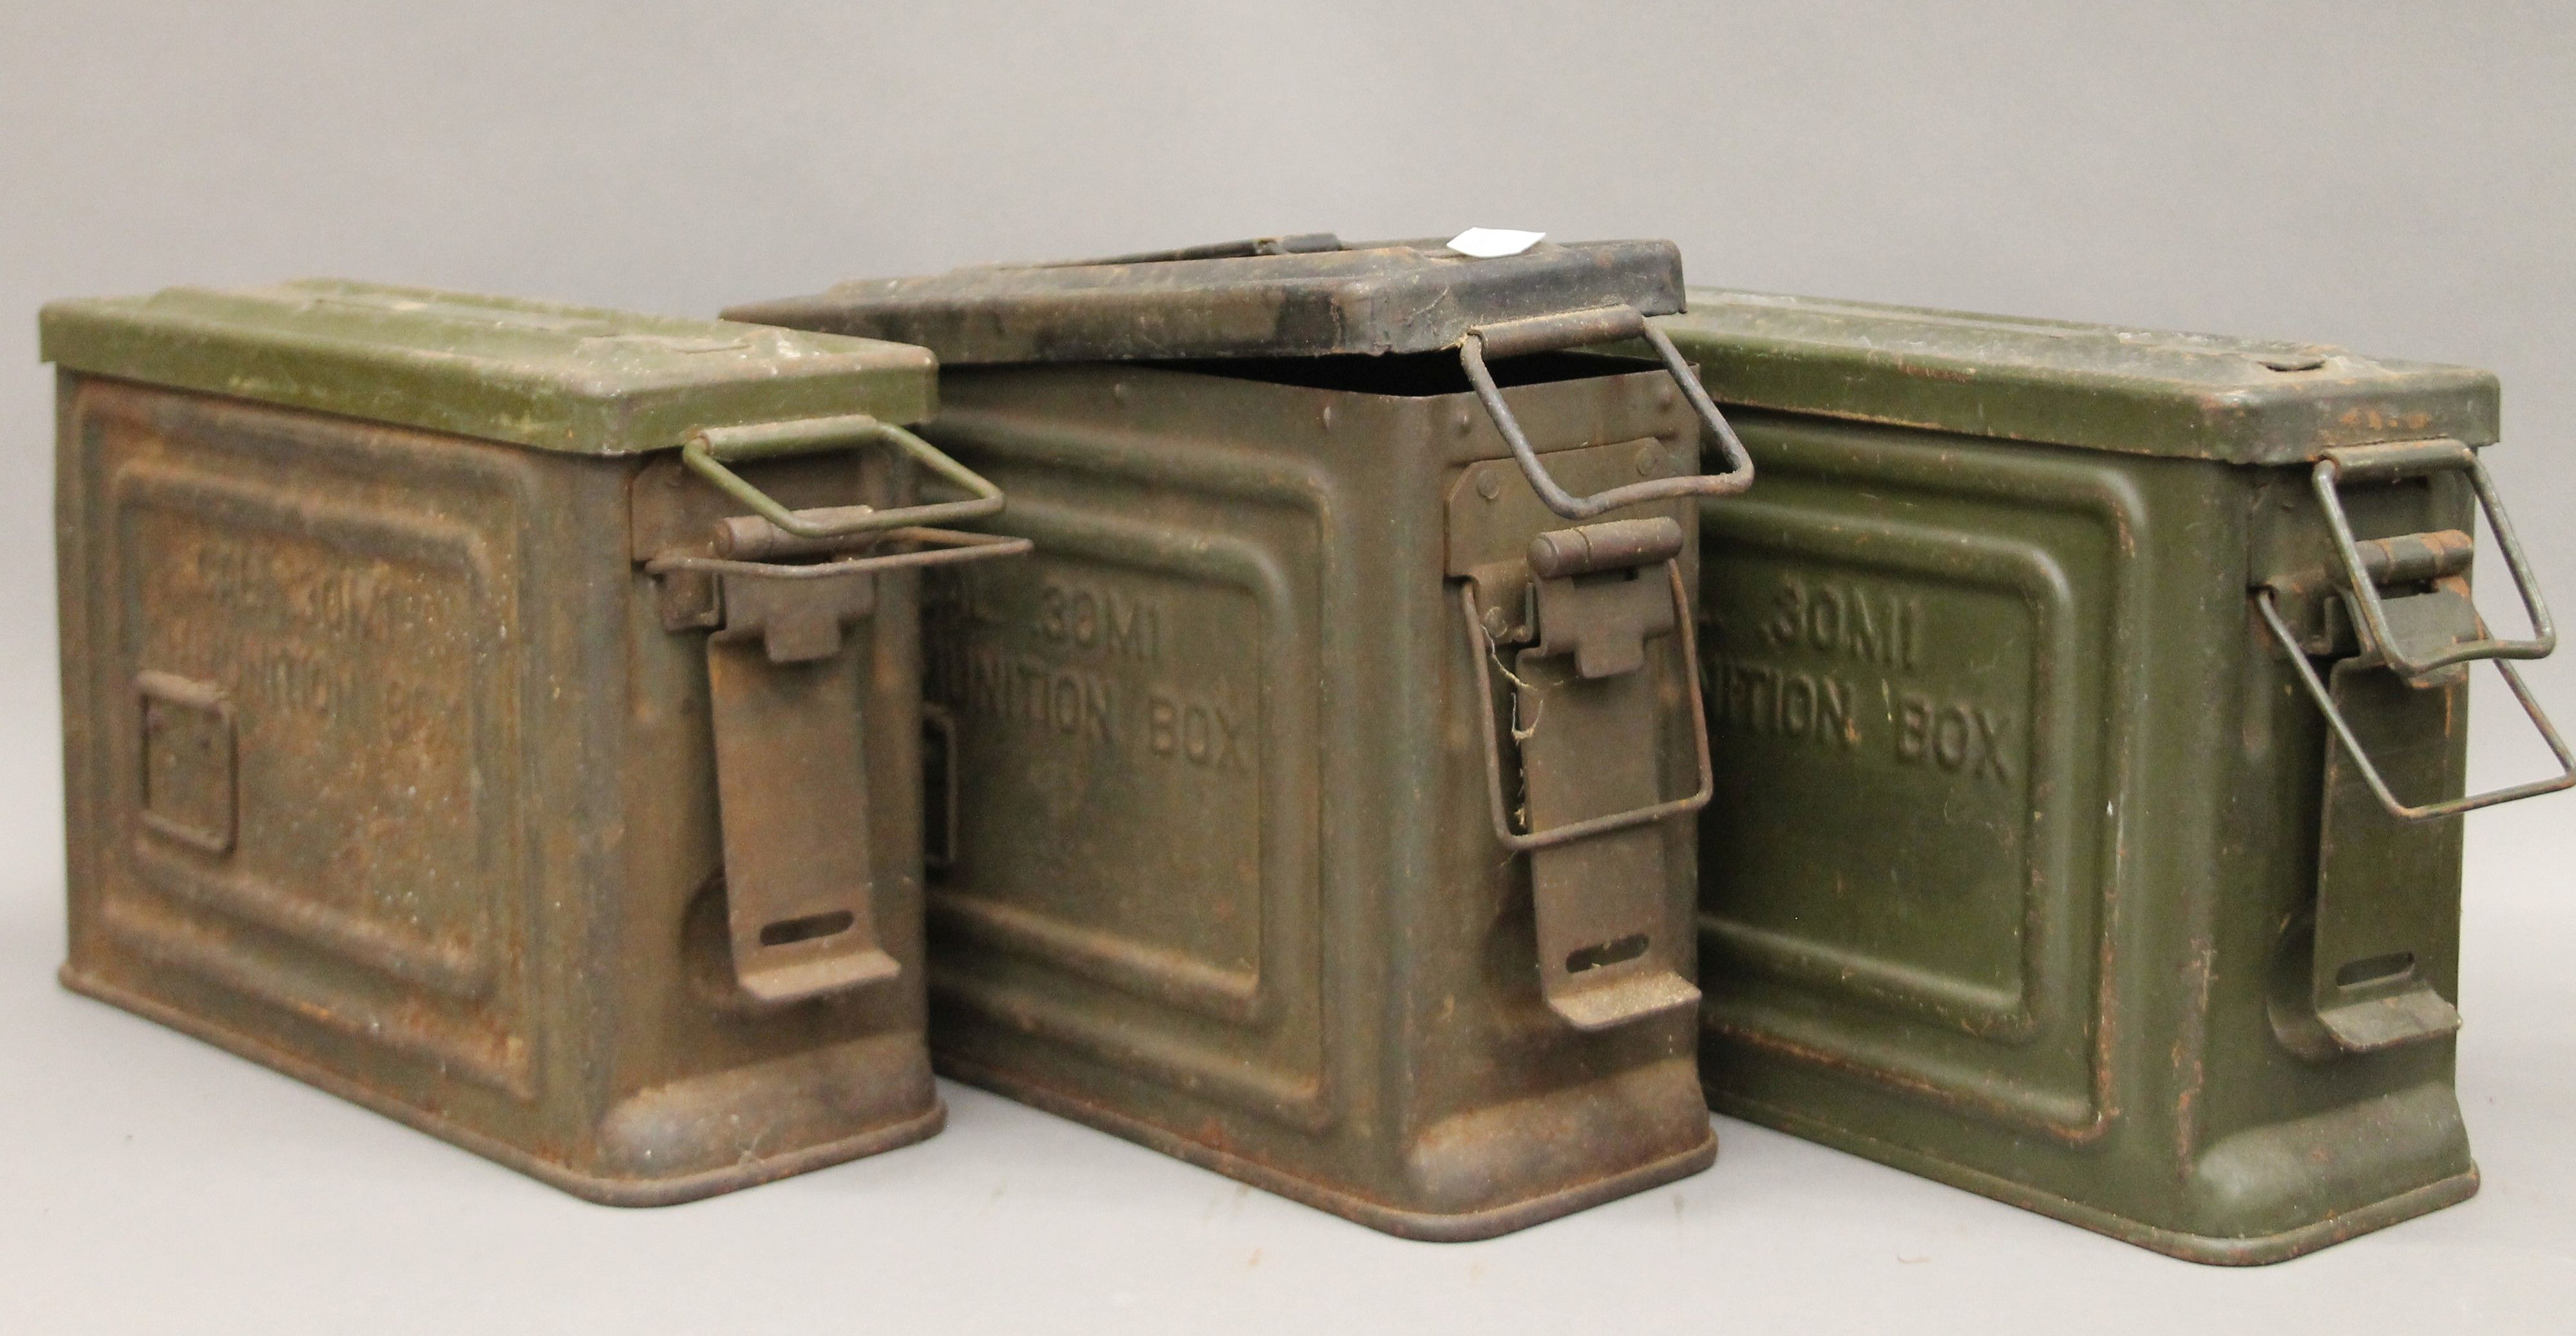 A quantity of various militaria, including helmets, belts, ammunition boxes, etc. - Image 2 of 5